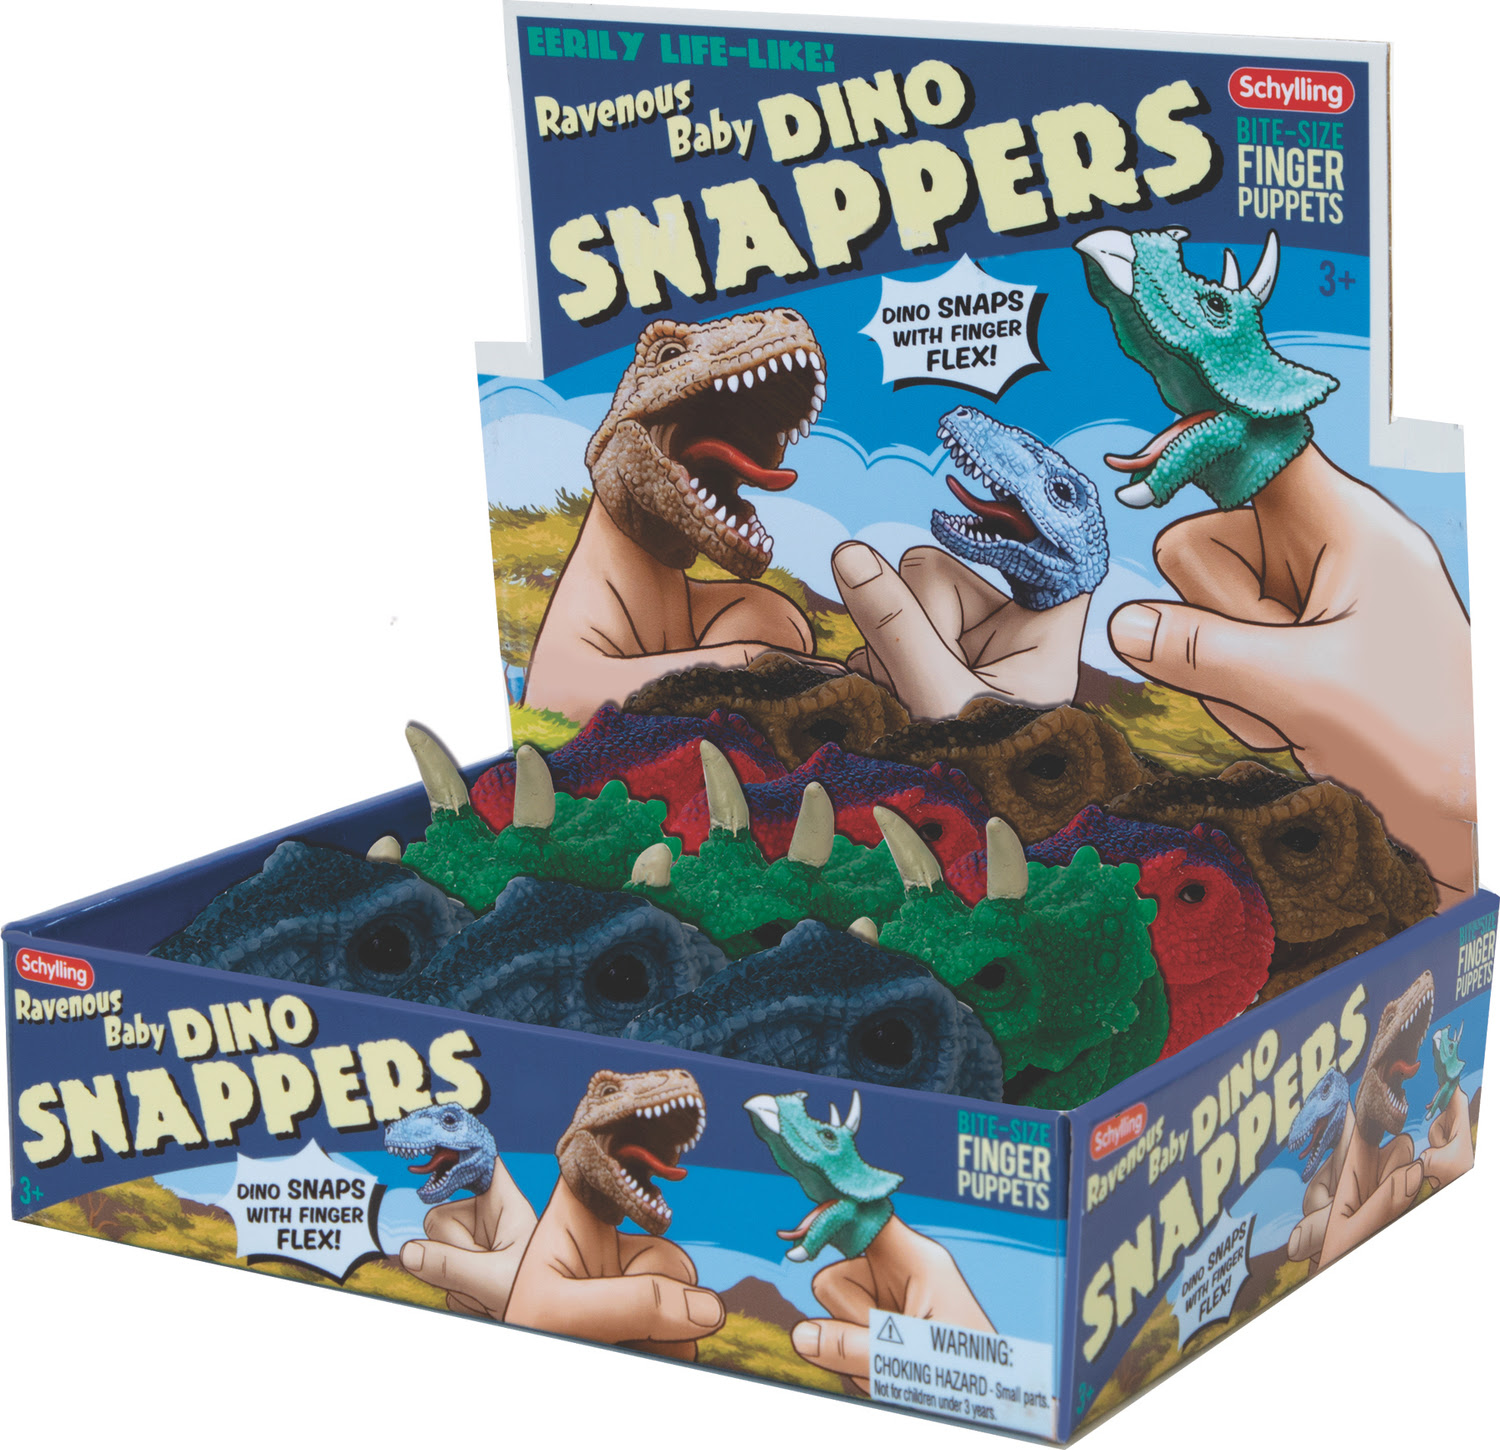 Baby Dino Snappers Geppetto's Toys Schylling Toys